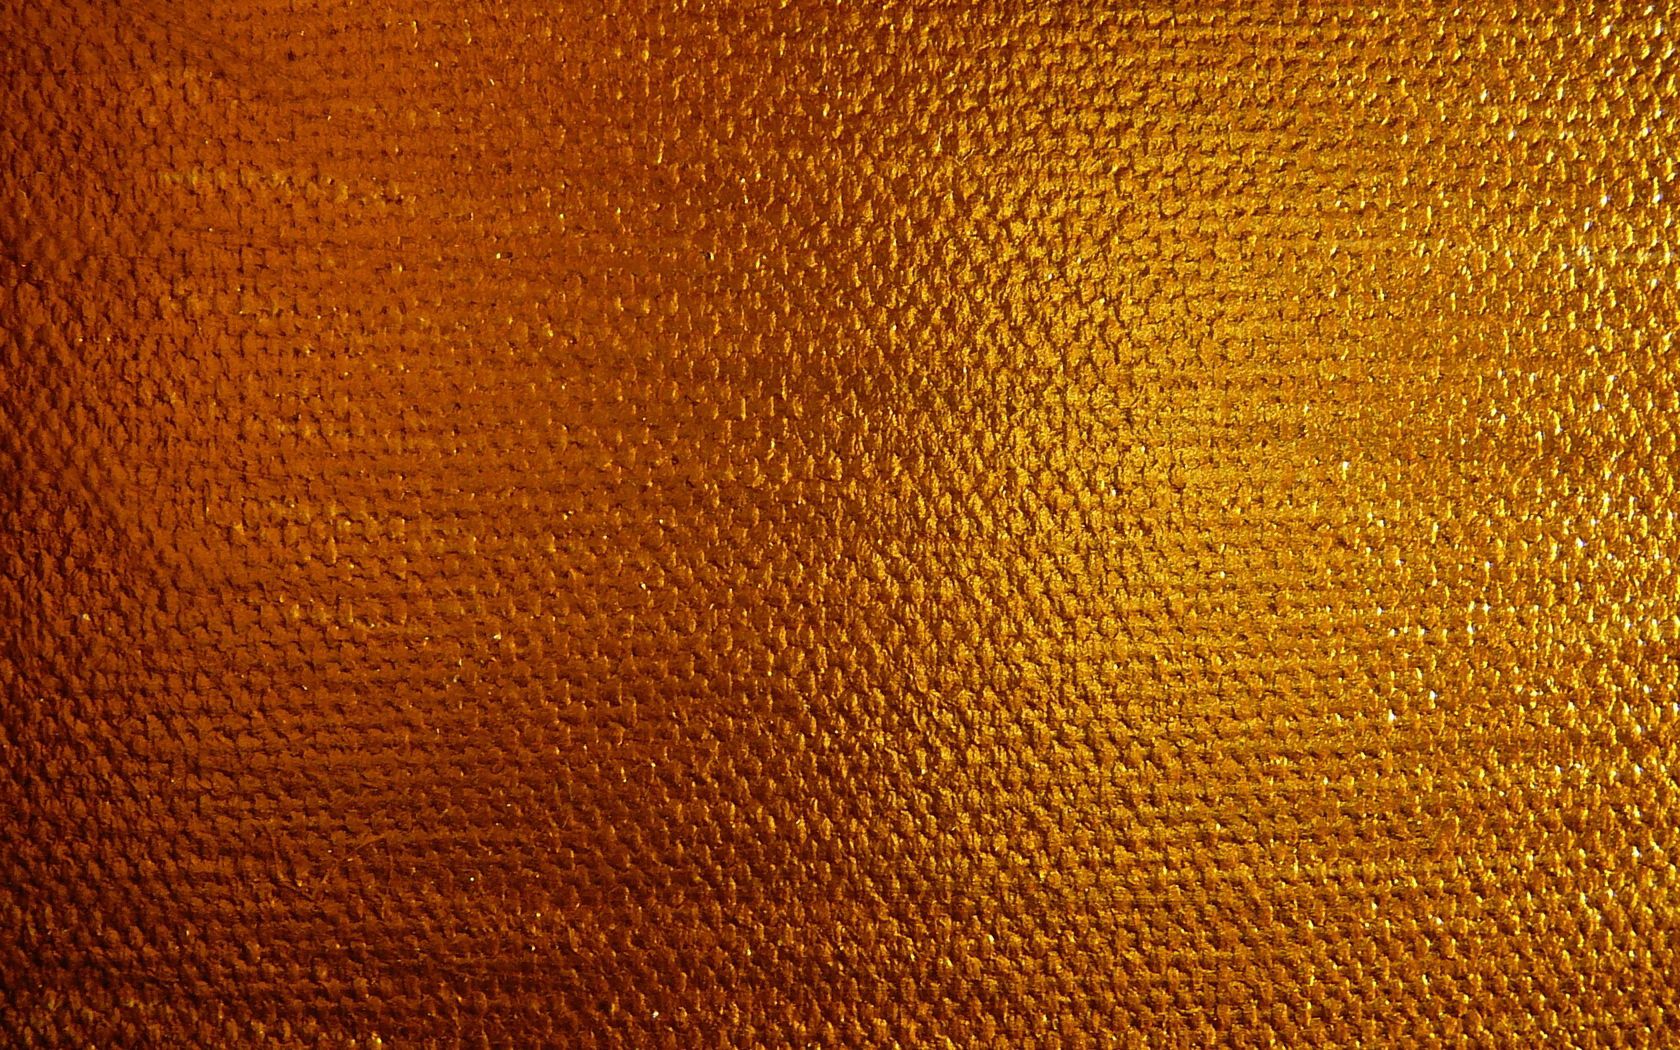 gold, golden, texture, textures, cloth, canvas, weave, sackcloth cell phone wallpapers